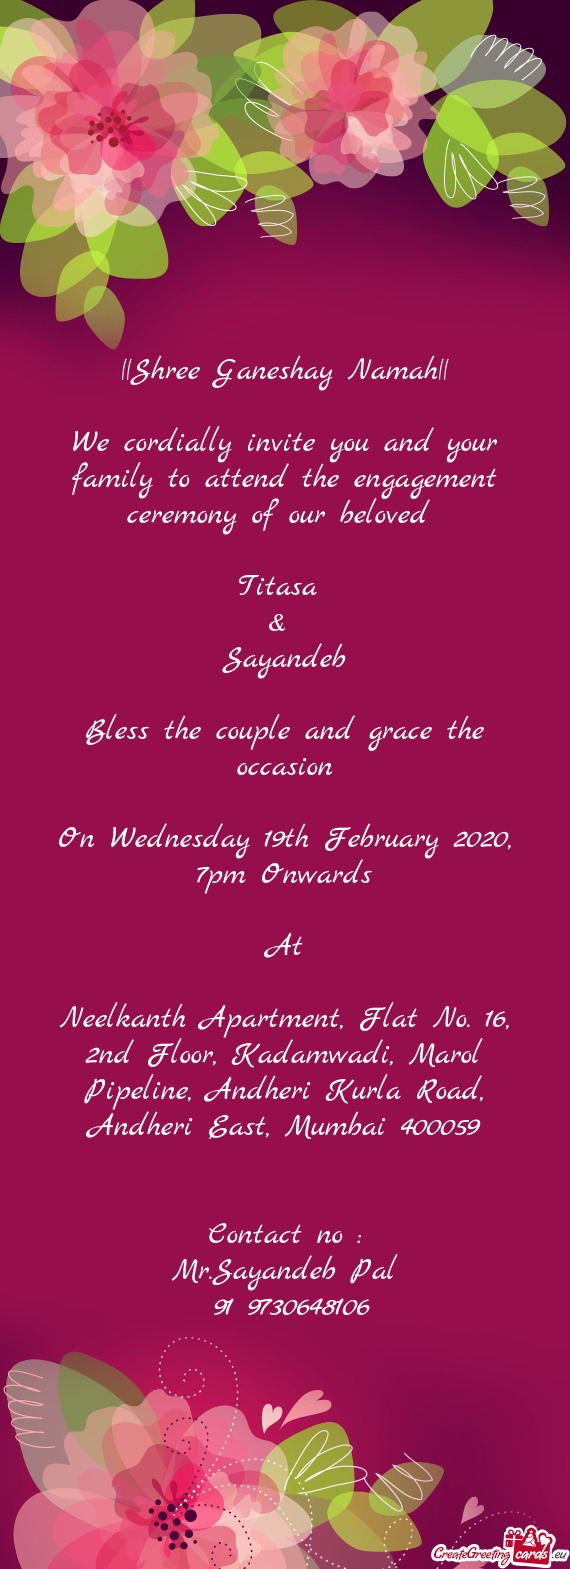 On Wednesday 19th February 2020, 7pm Onwards